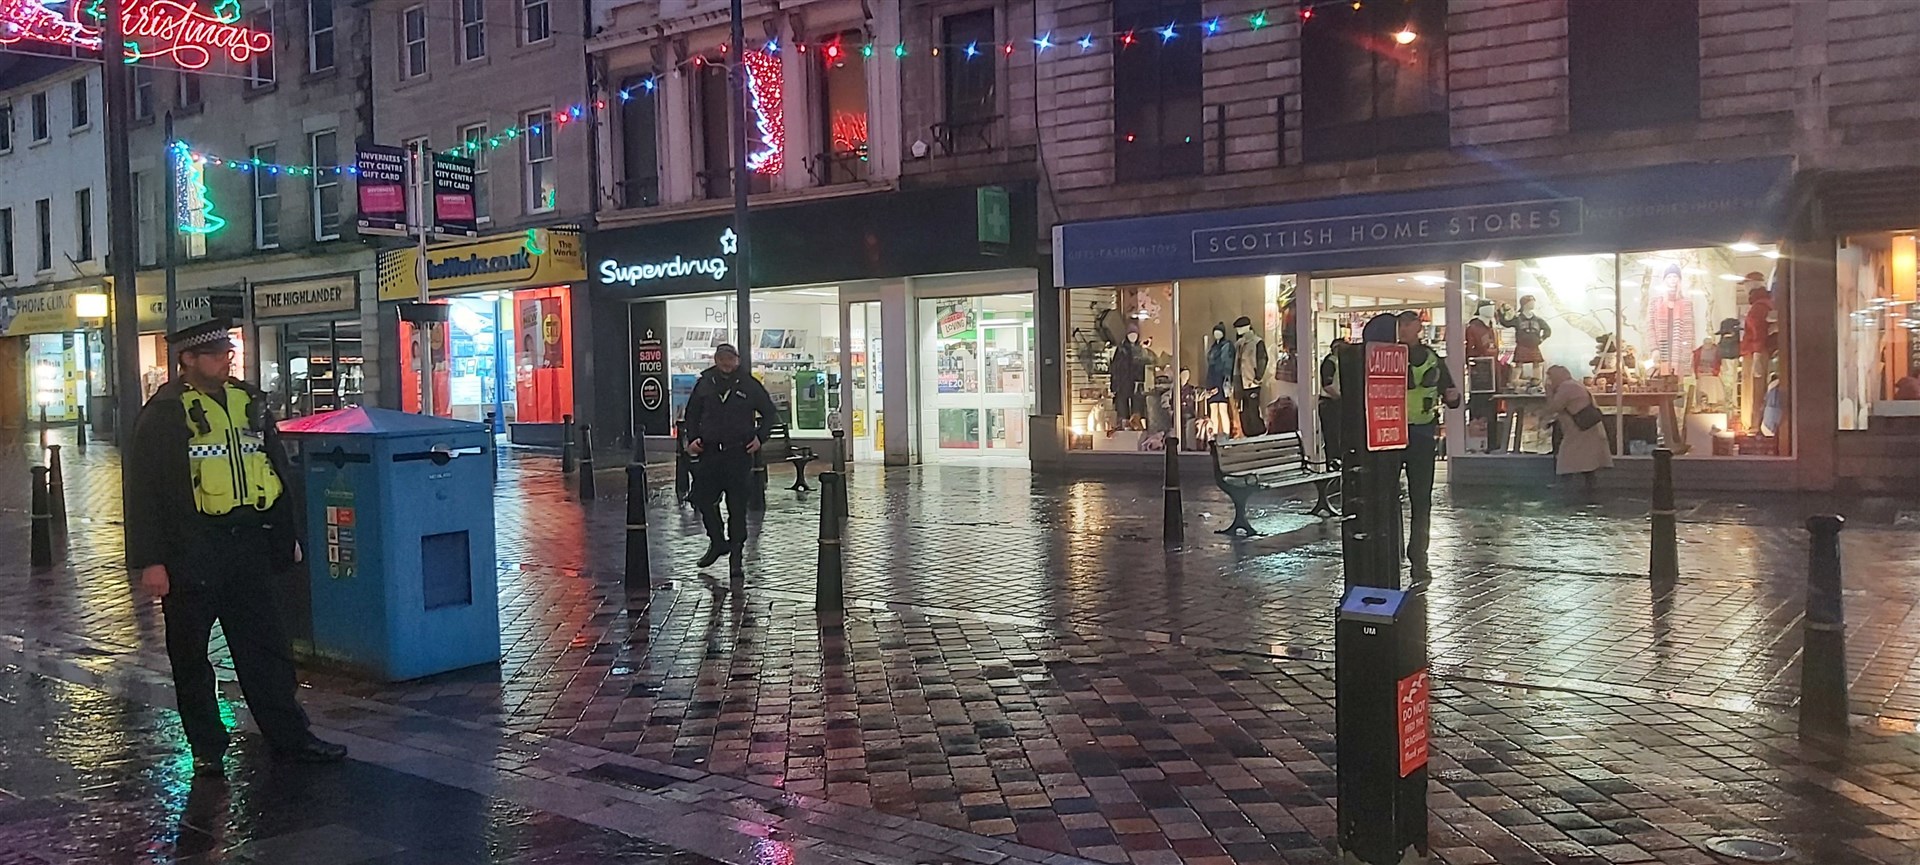 Police in the High Street earlier.